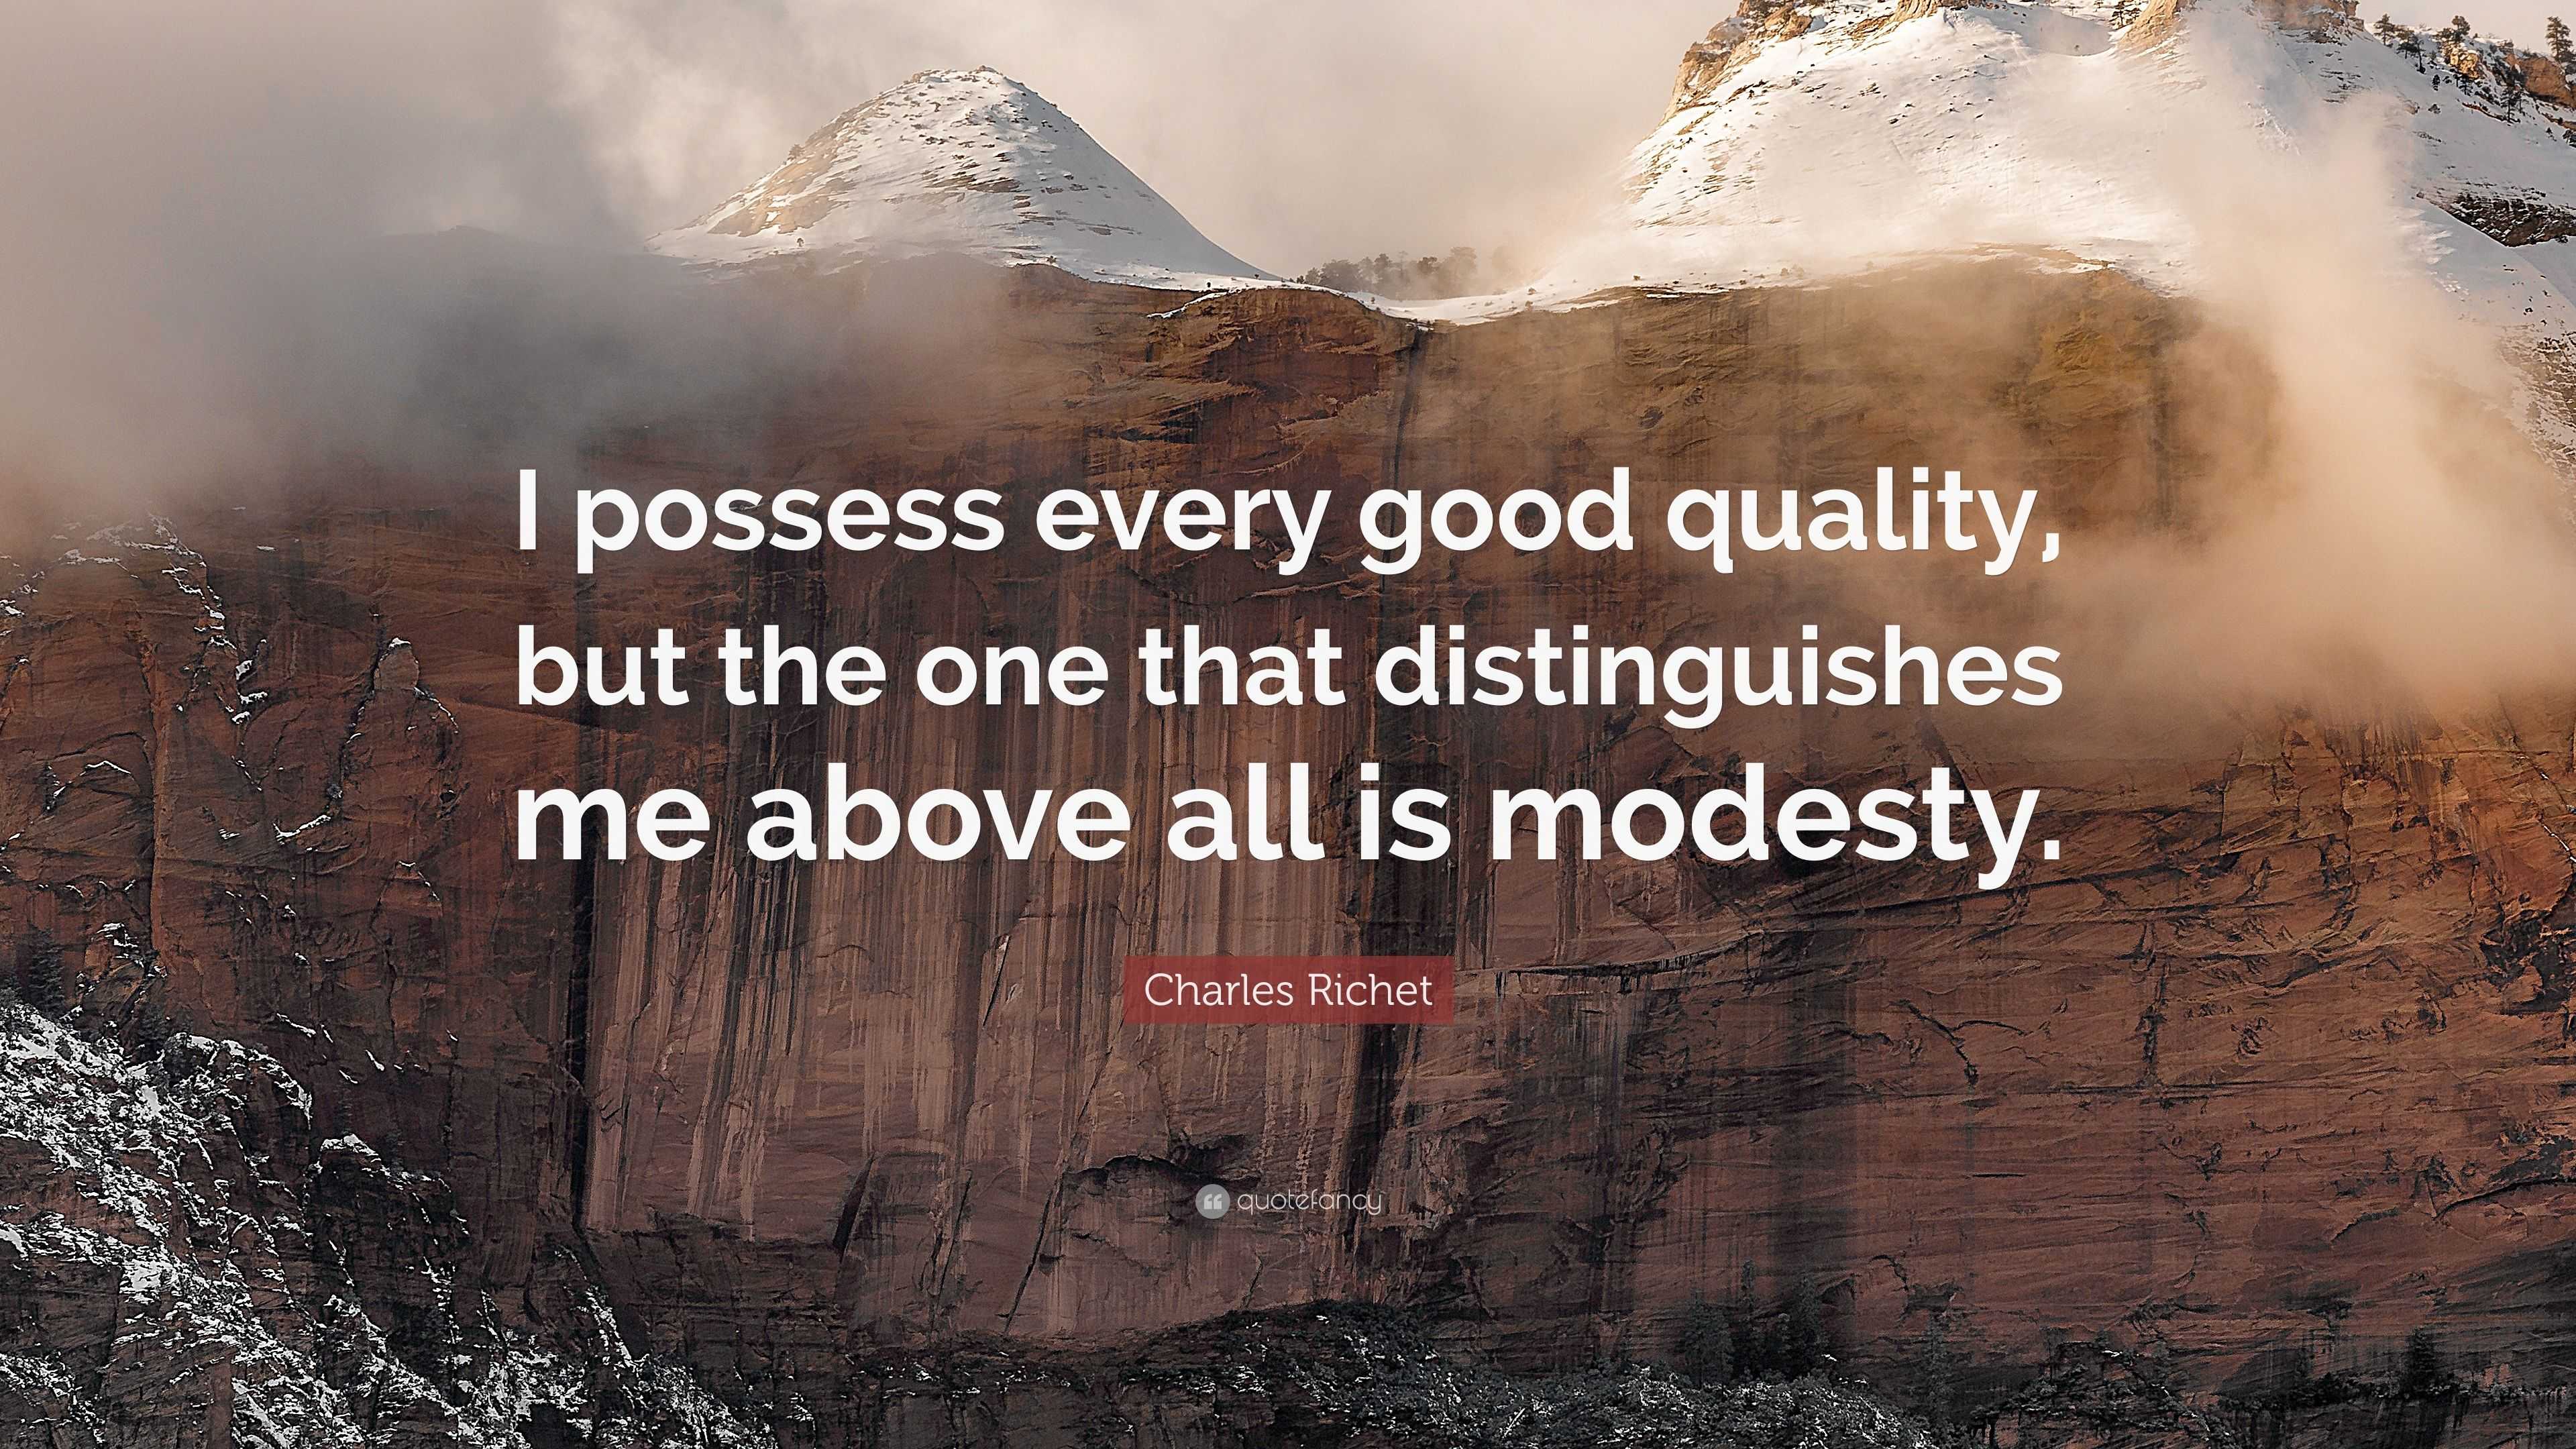 Charles Richet Quote “i Possess Every Good Quality But The One That Distinguishes Me Above All